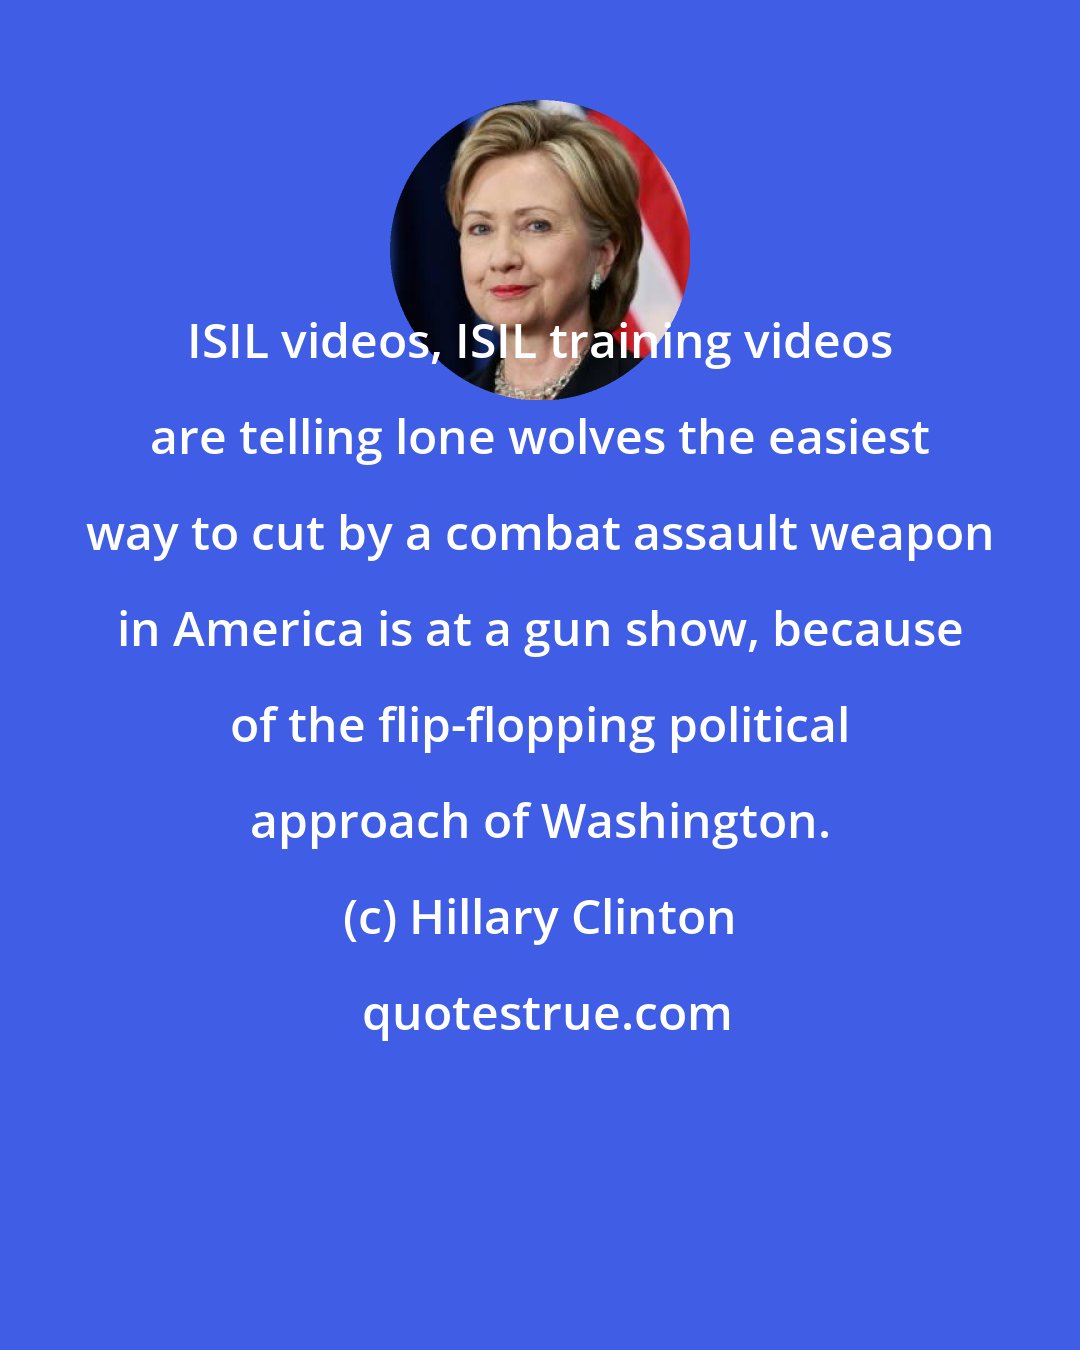 Hillary Clinton: ISIL videos, ISIL training videos are telling lone wolves the easiest way to cut by a combat assault weapon in America is at a gun show, because of the flip-flopping political approach of Washington.